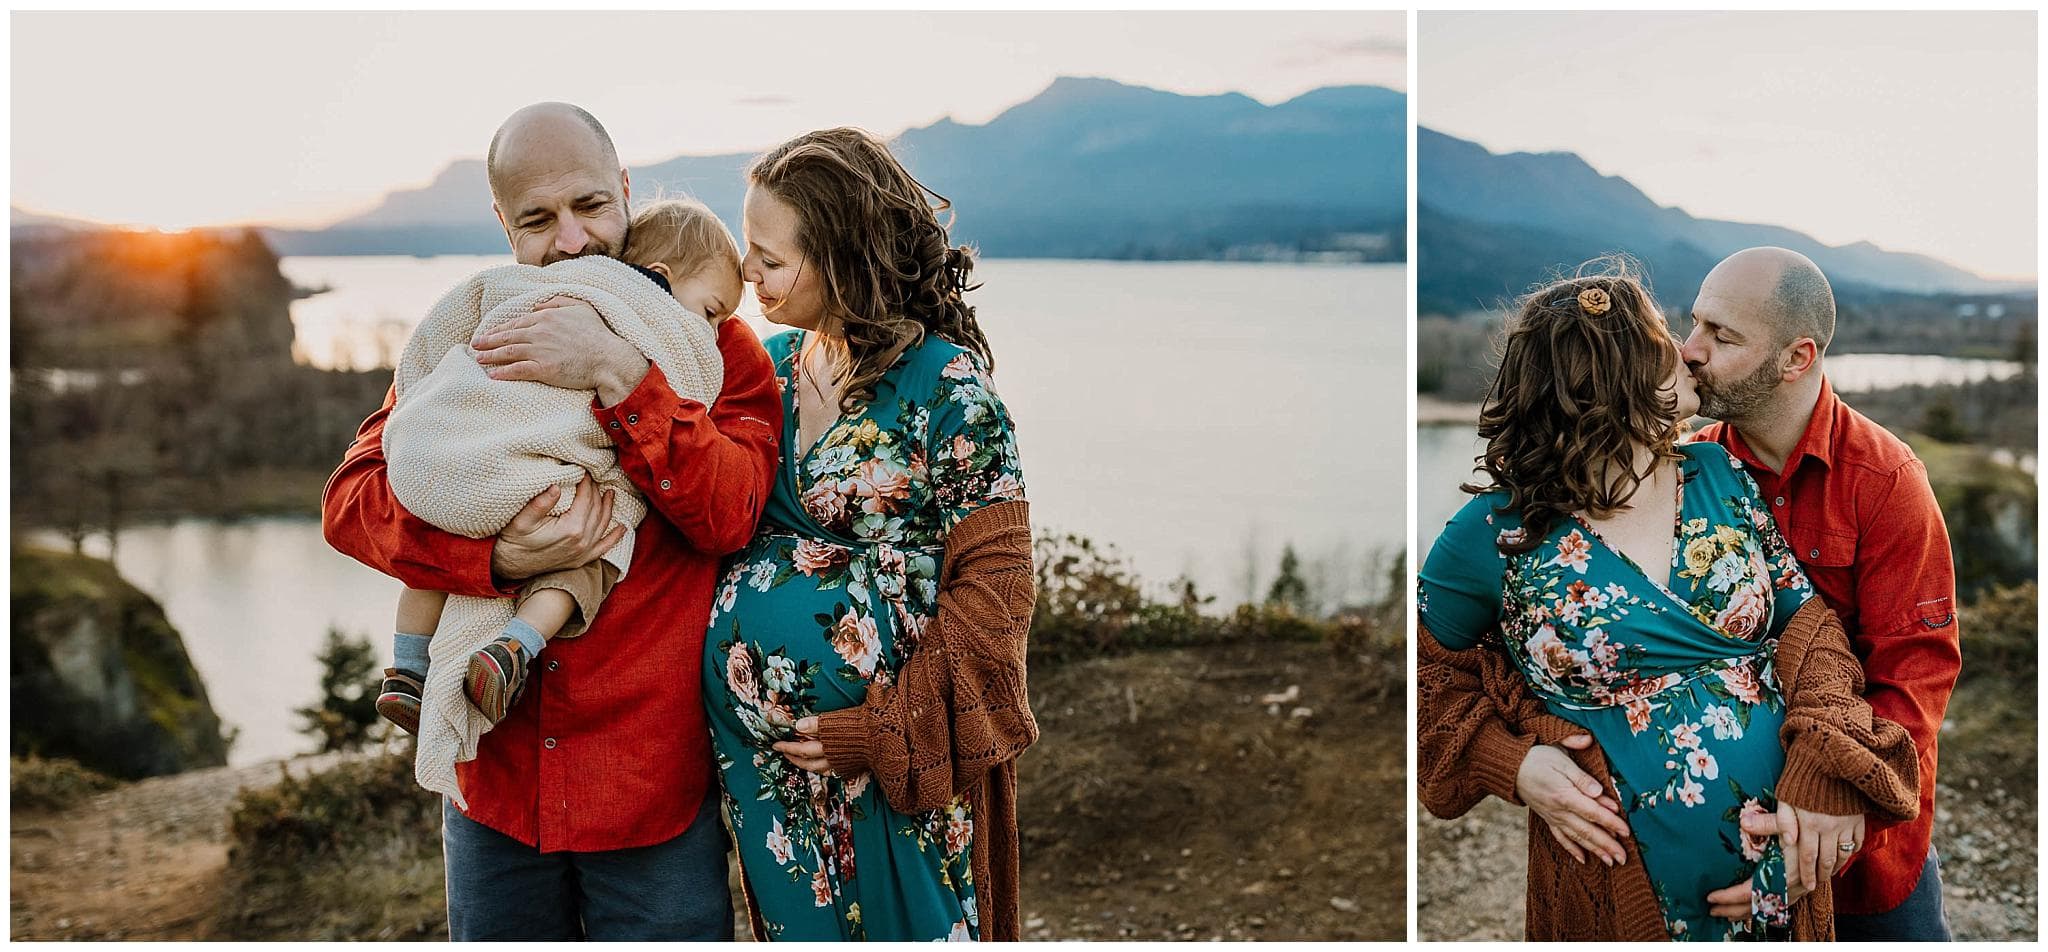 photos of family cuddling together with beautiful mountain scene at sunset behind them - maternity photo